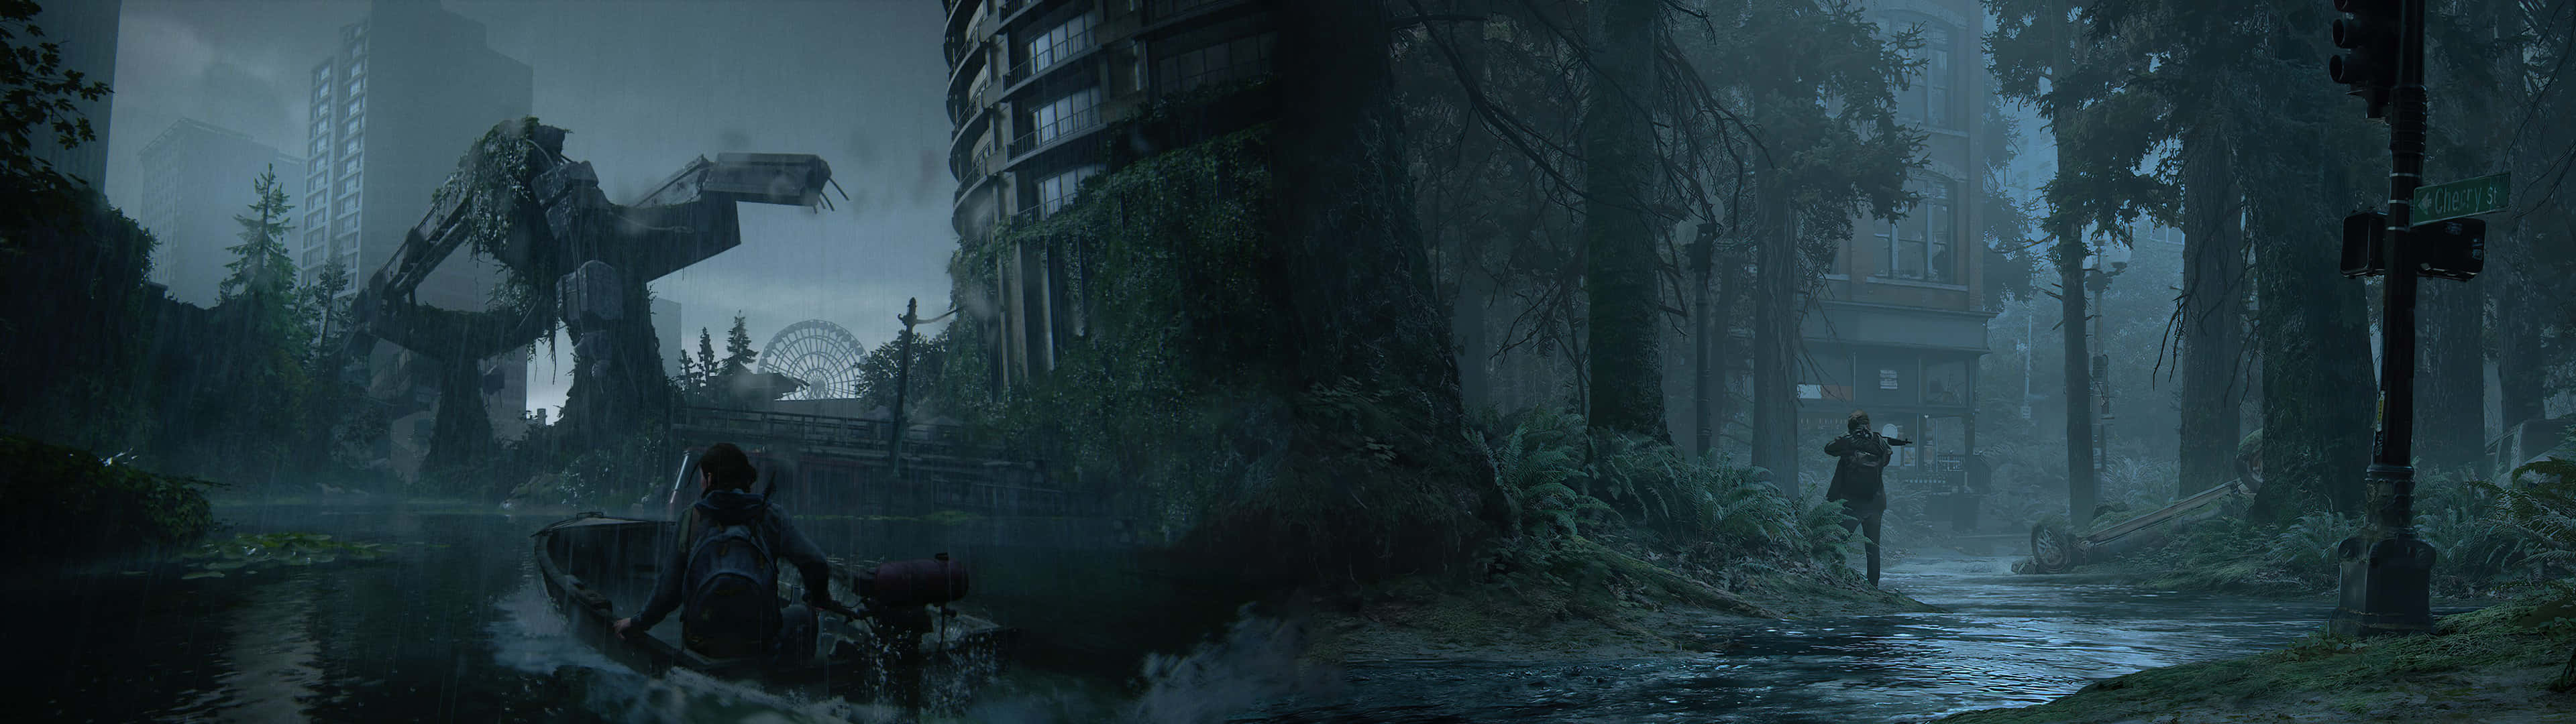 The Last Of Us 2 3840 X 1080 Gaming Wallpaper